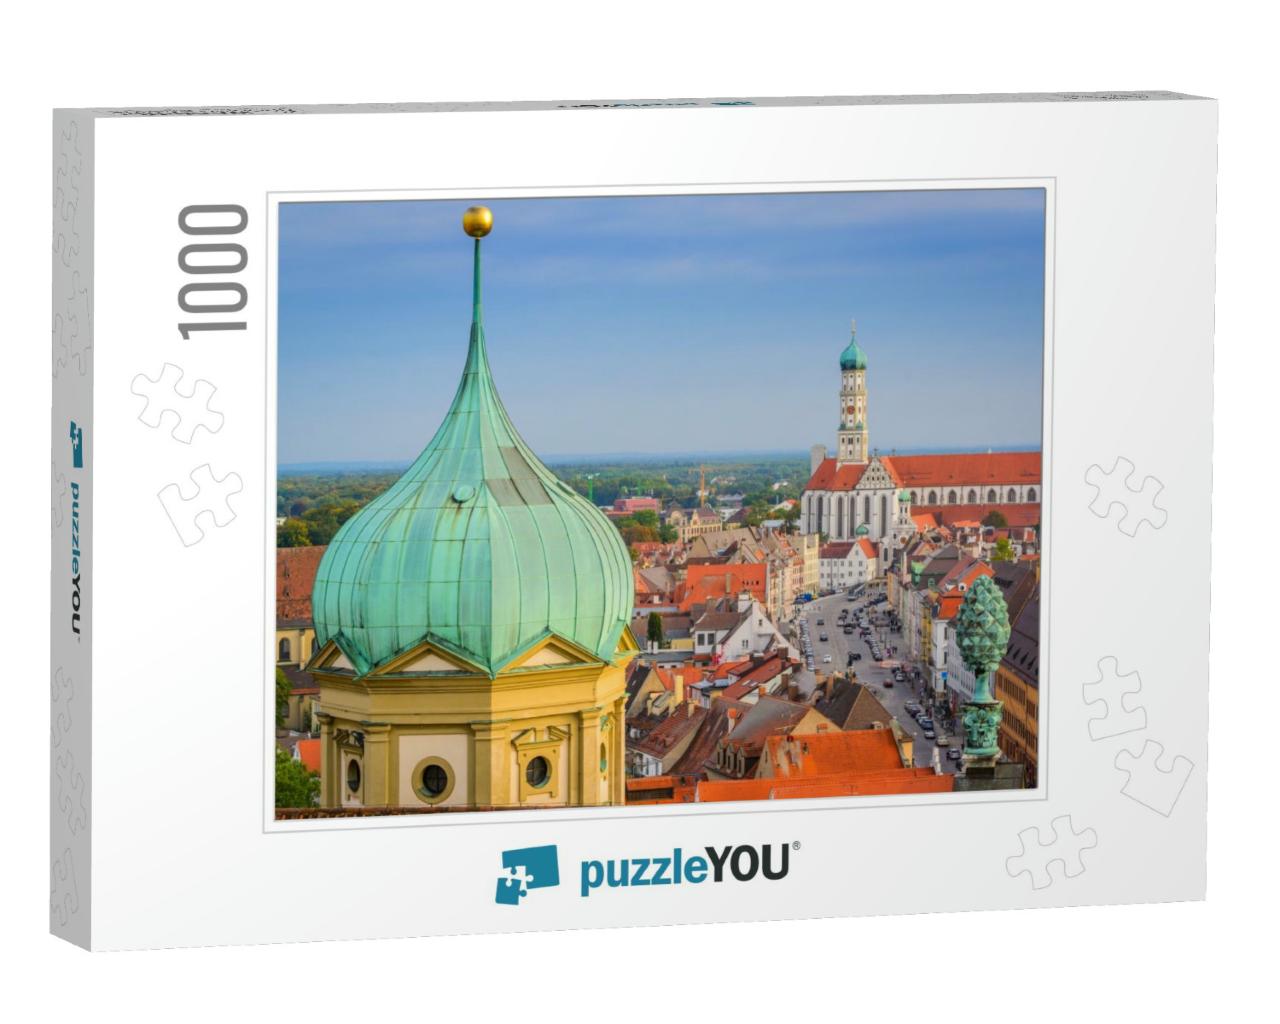 Augsburg, Germany Skyline with Cathedrals... Jigsaw Puzzle with 1000 pieces